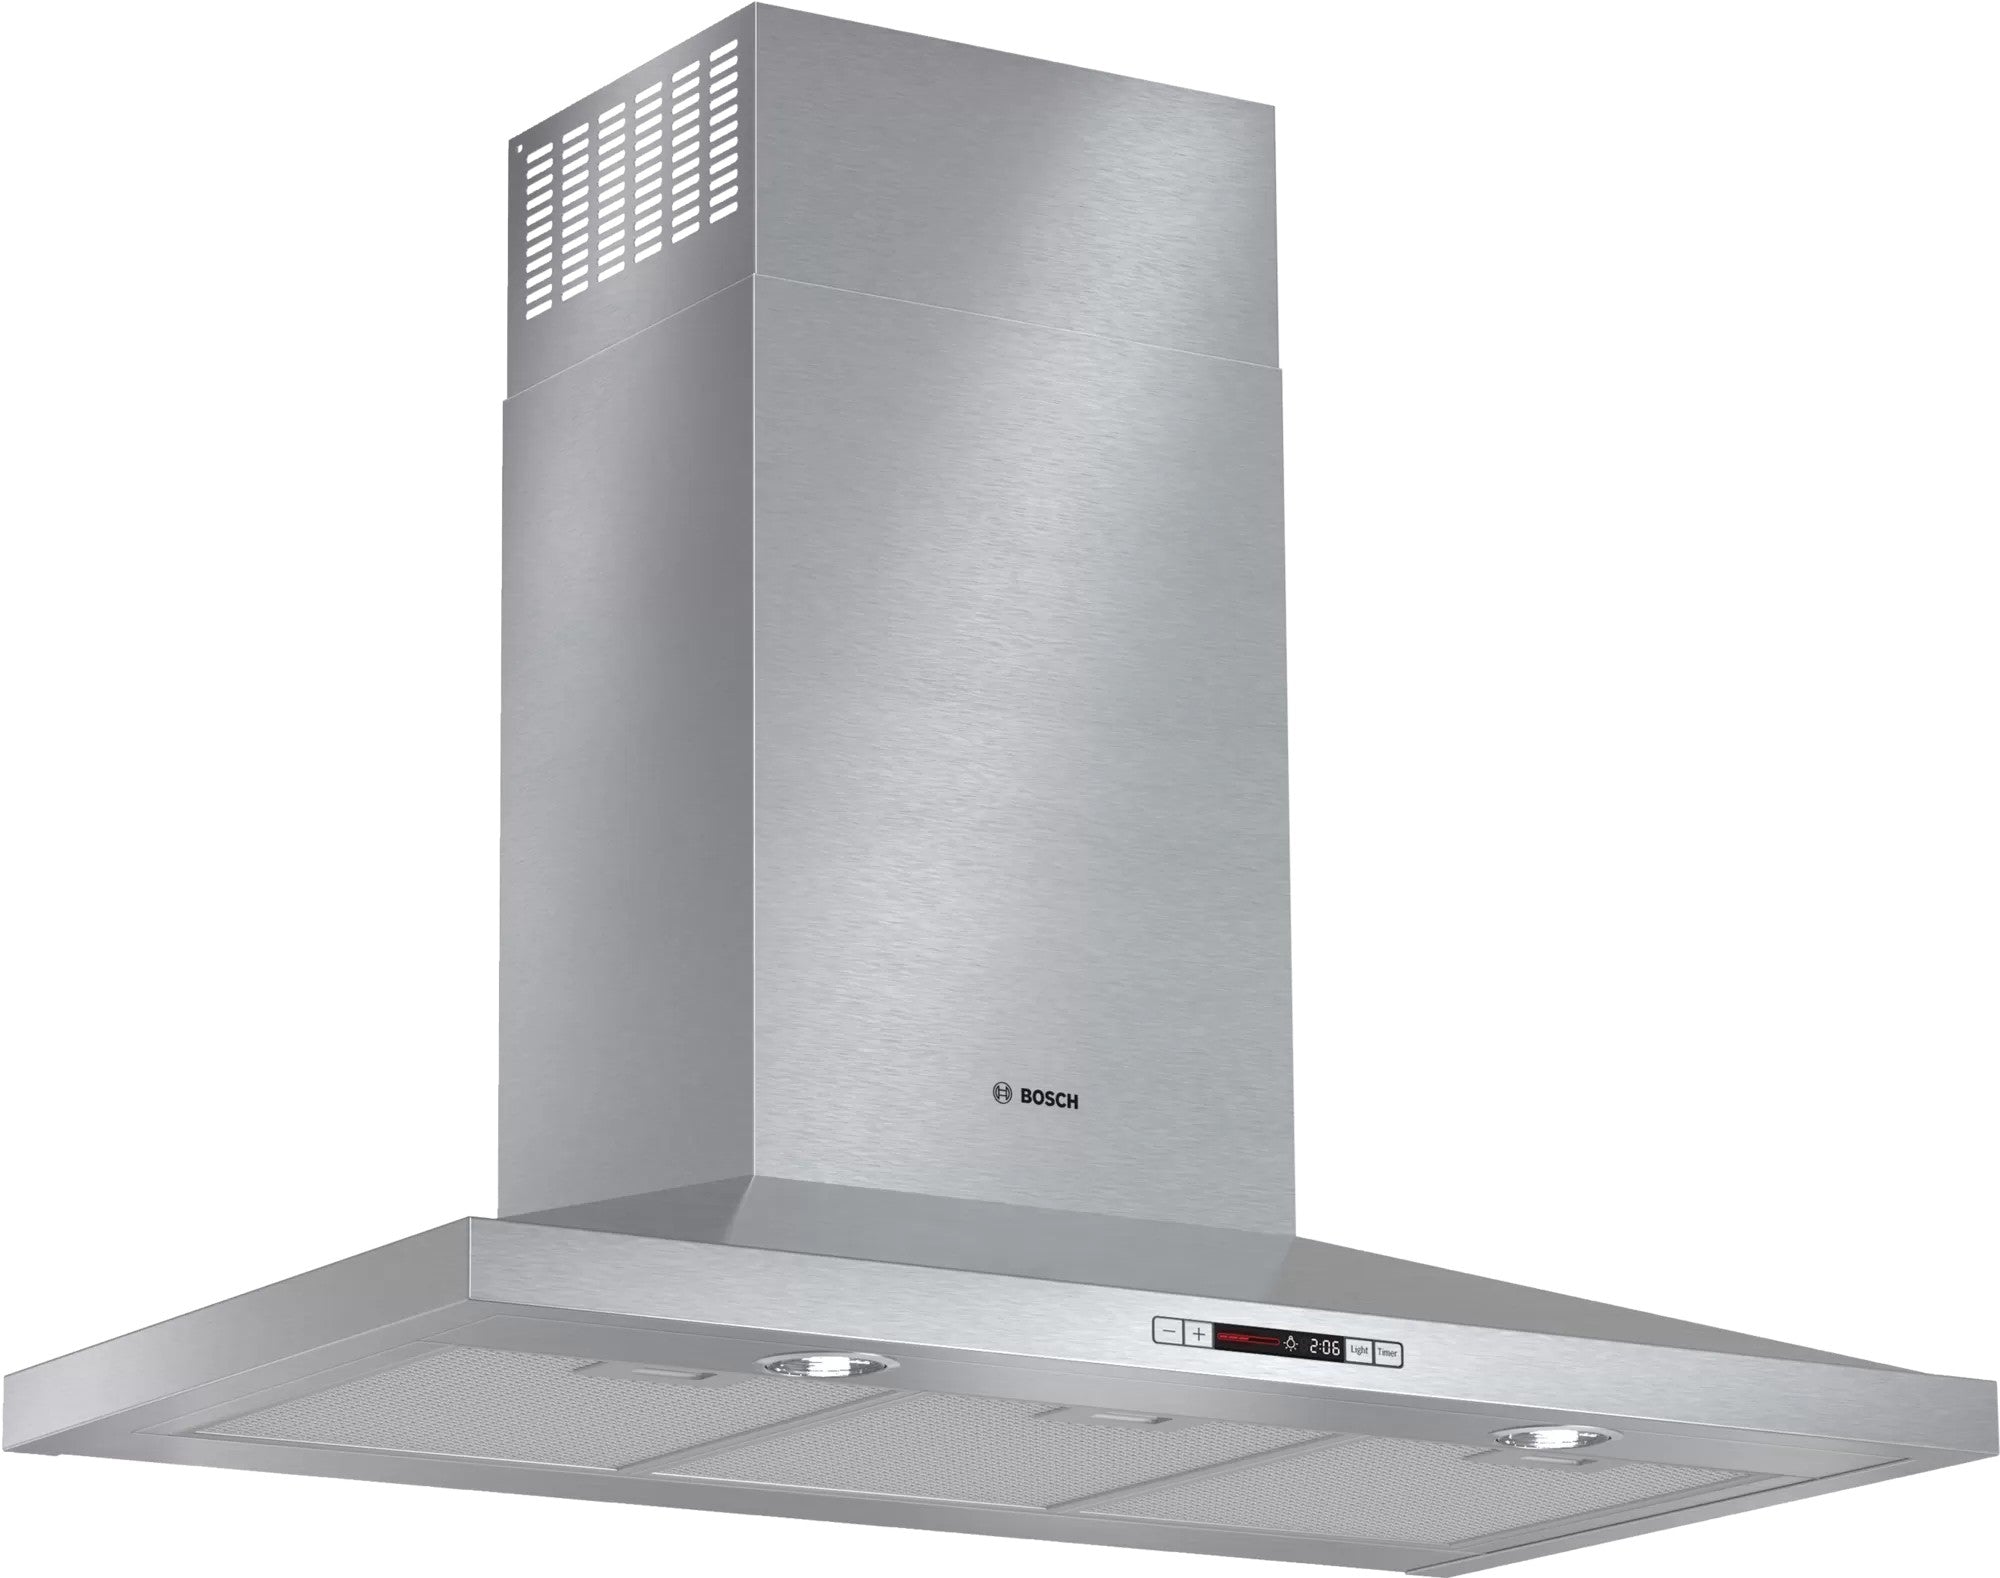 Bosch - 42.6 Inch  CFM Wall Mount and Chimney Range Vent in Stainless - HCP36651UC